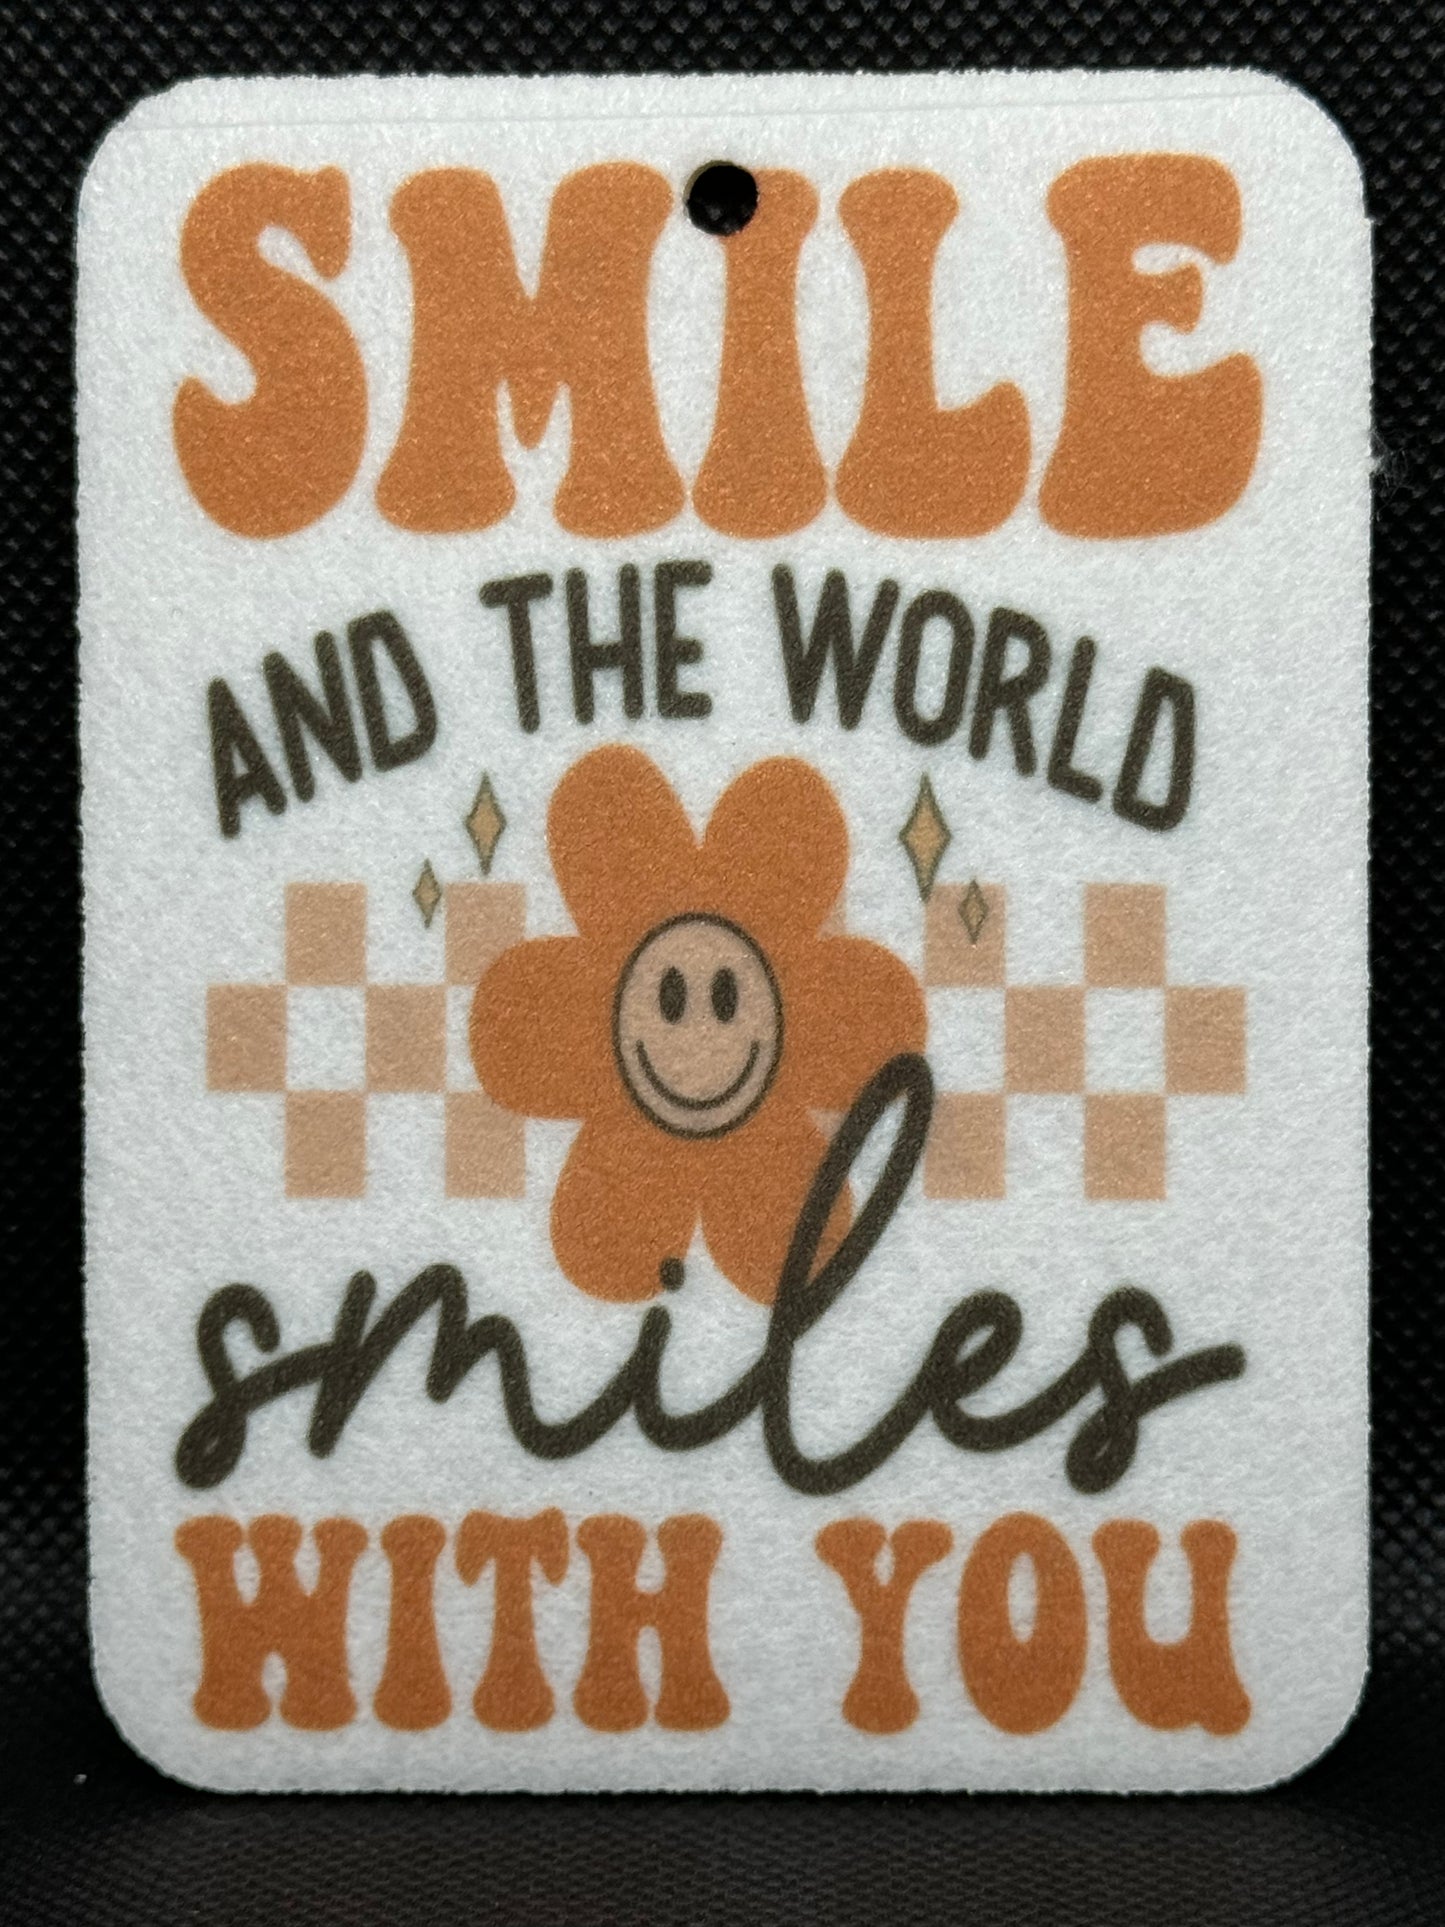 Smile And The World Smile With You Retro Smiley Felt Freshie 1286